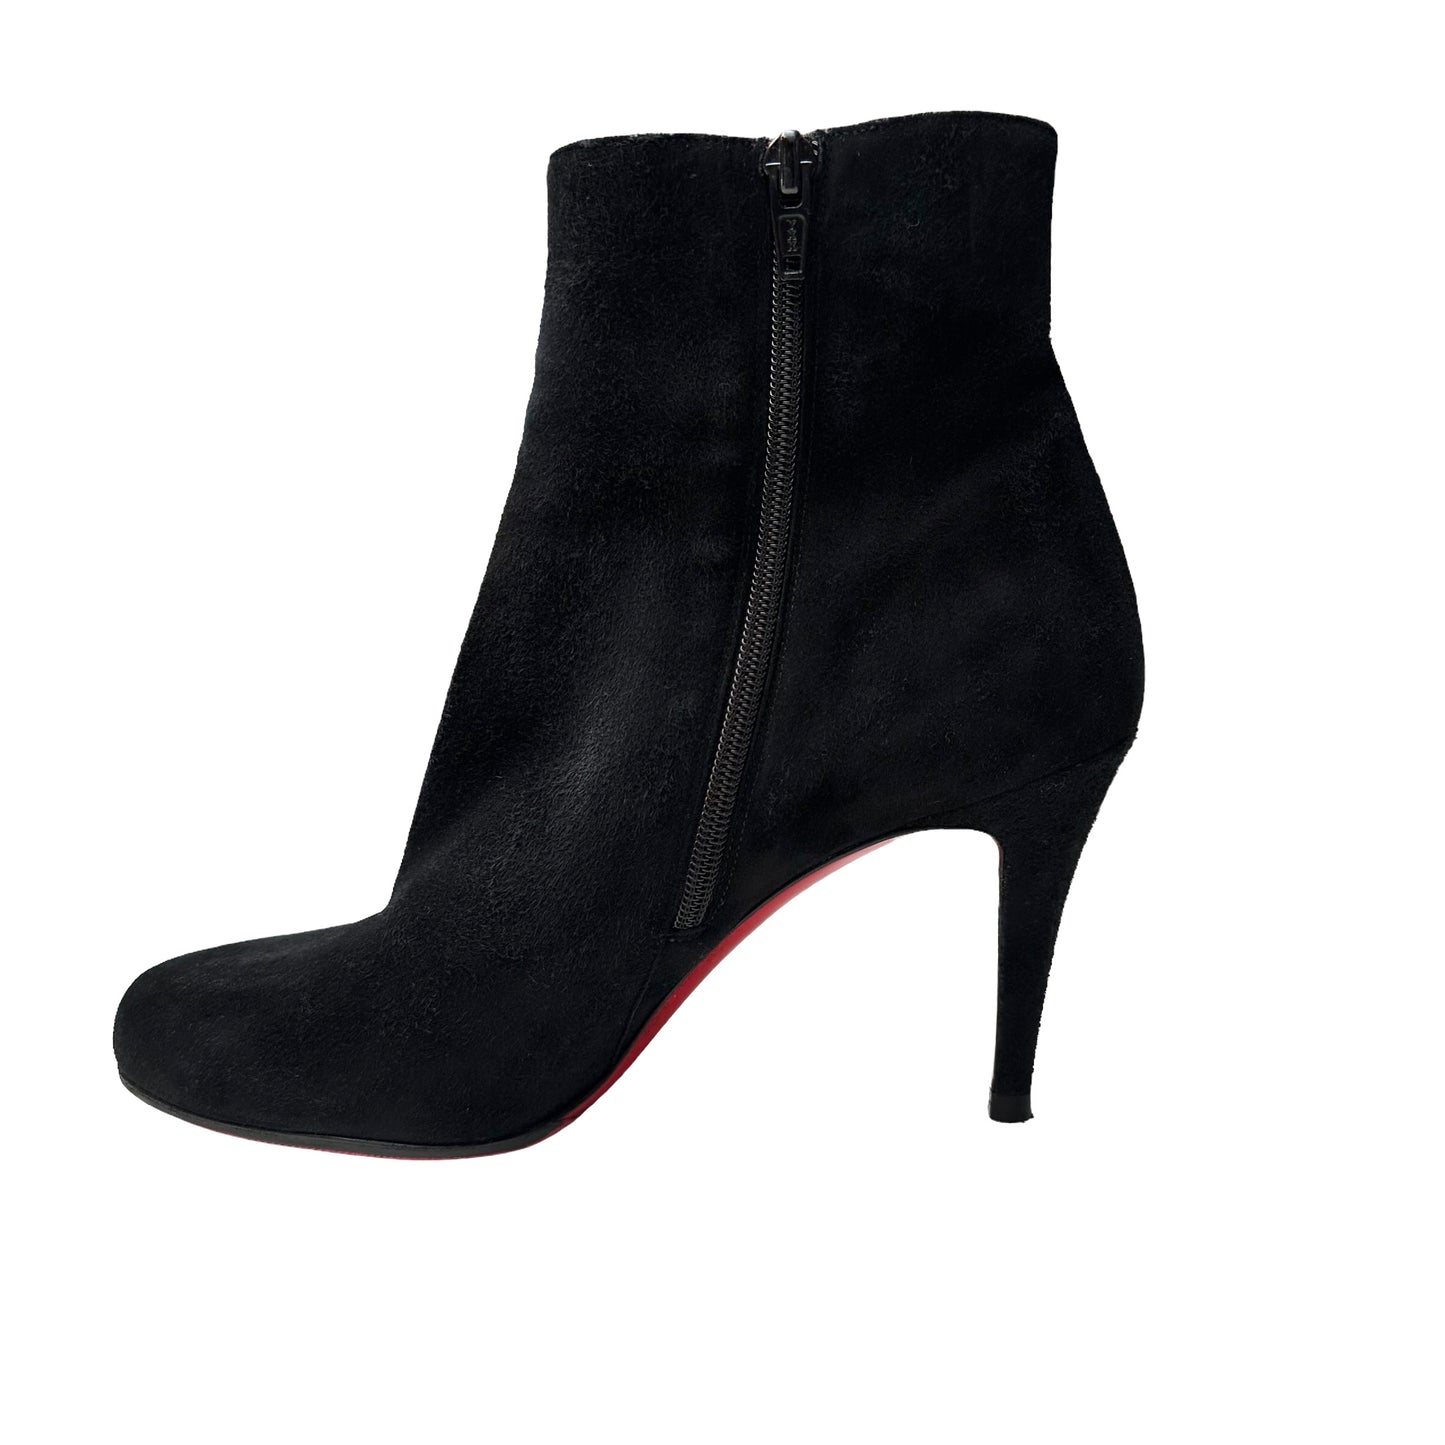 Black Suede Heeled Boots - 9.5